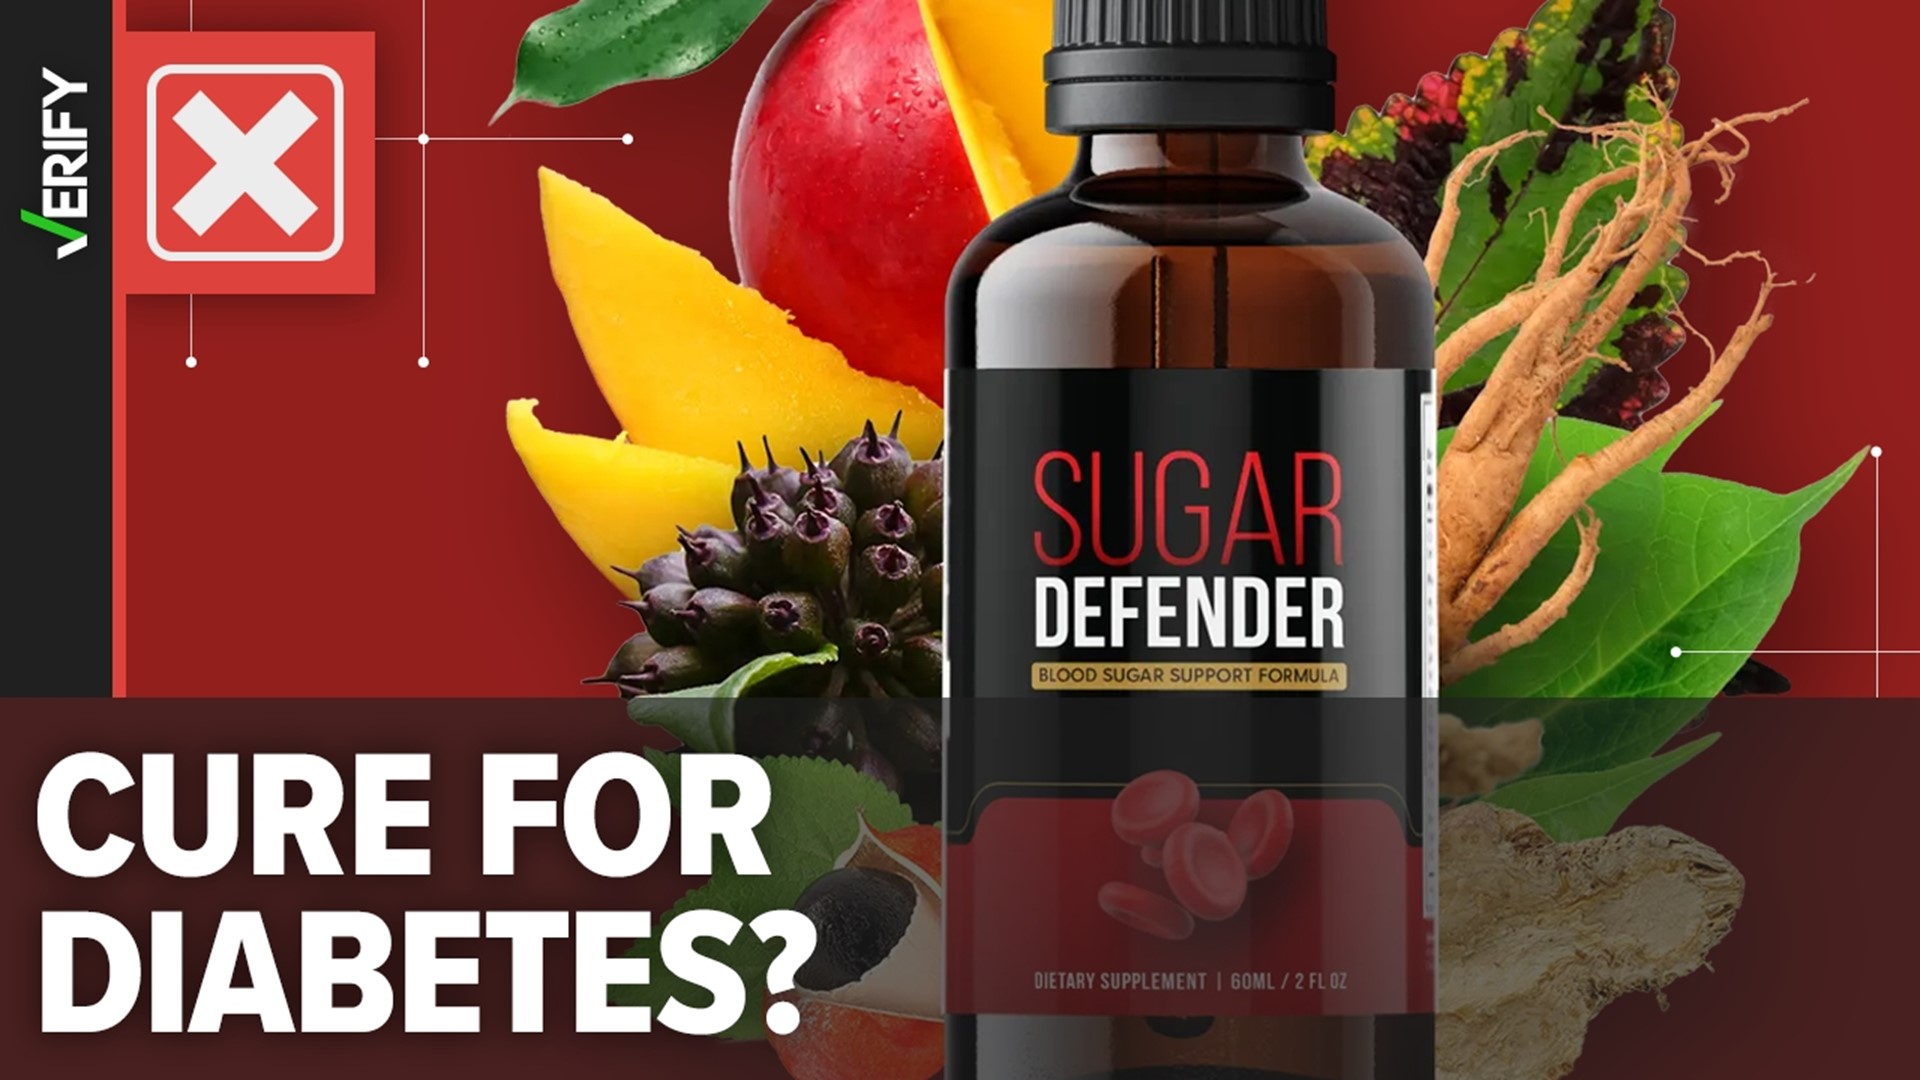 Ads suggest a “Tom Green’s Sugar Defender” helped over 100,000 stabilize blood sugar and “overcome” diabetes. It cannot cure diabetes and is an all-natural scam.